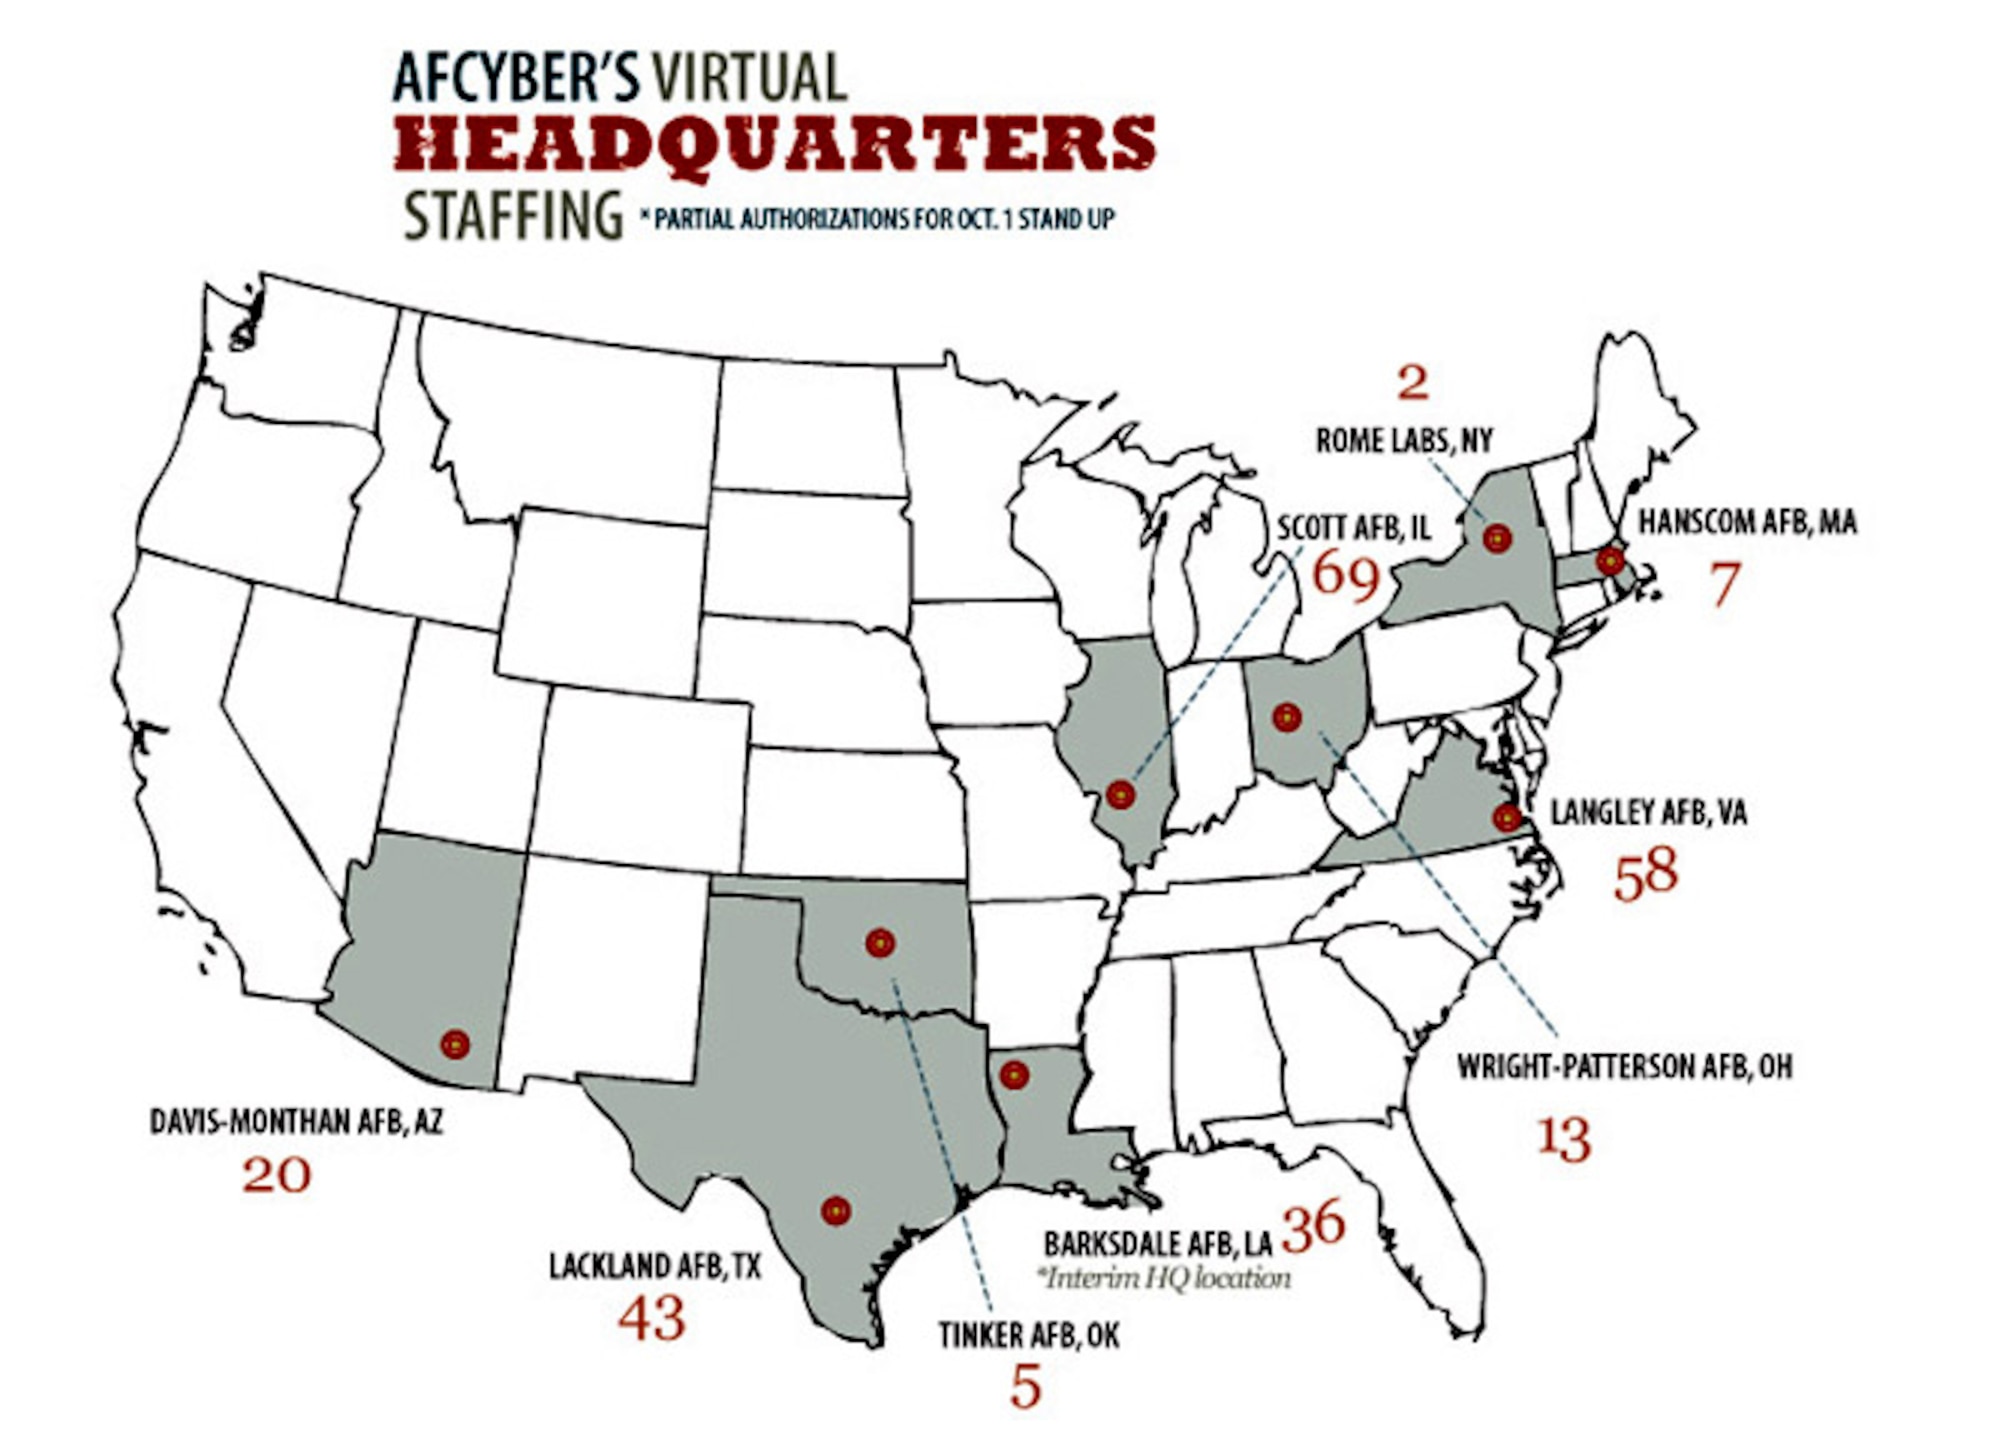 Shown are the partial manpower authorizations needed for Air Force Cyber Command officials to declare initial operations capabilities by Oct. 1. The command will operate  virtually among these distributed locations until the final basing decision has been made. It is not know whether the authorizations will stay in place, or move to a final location, or a combination of the two. (U.S. Air Force graphic) 